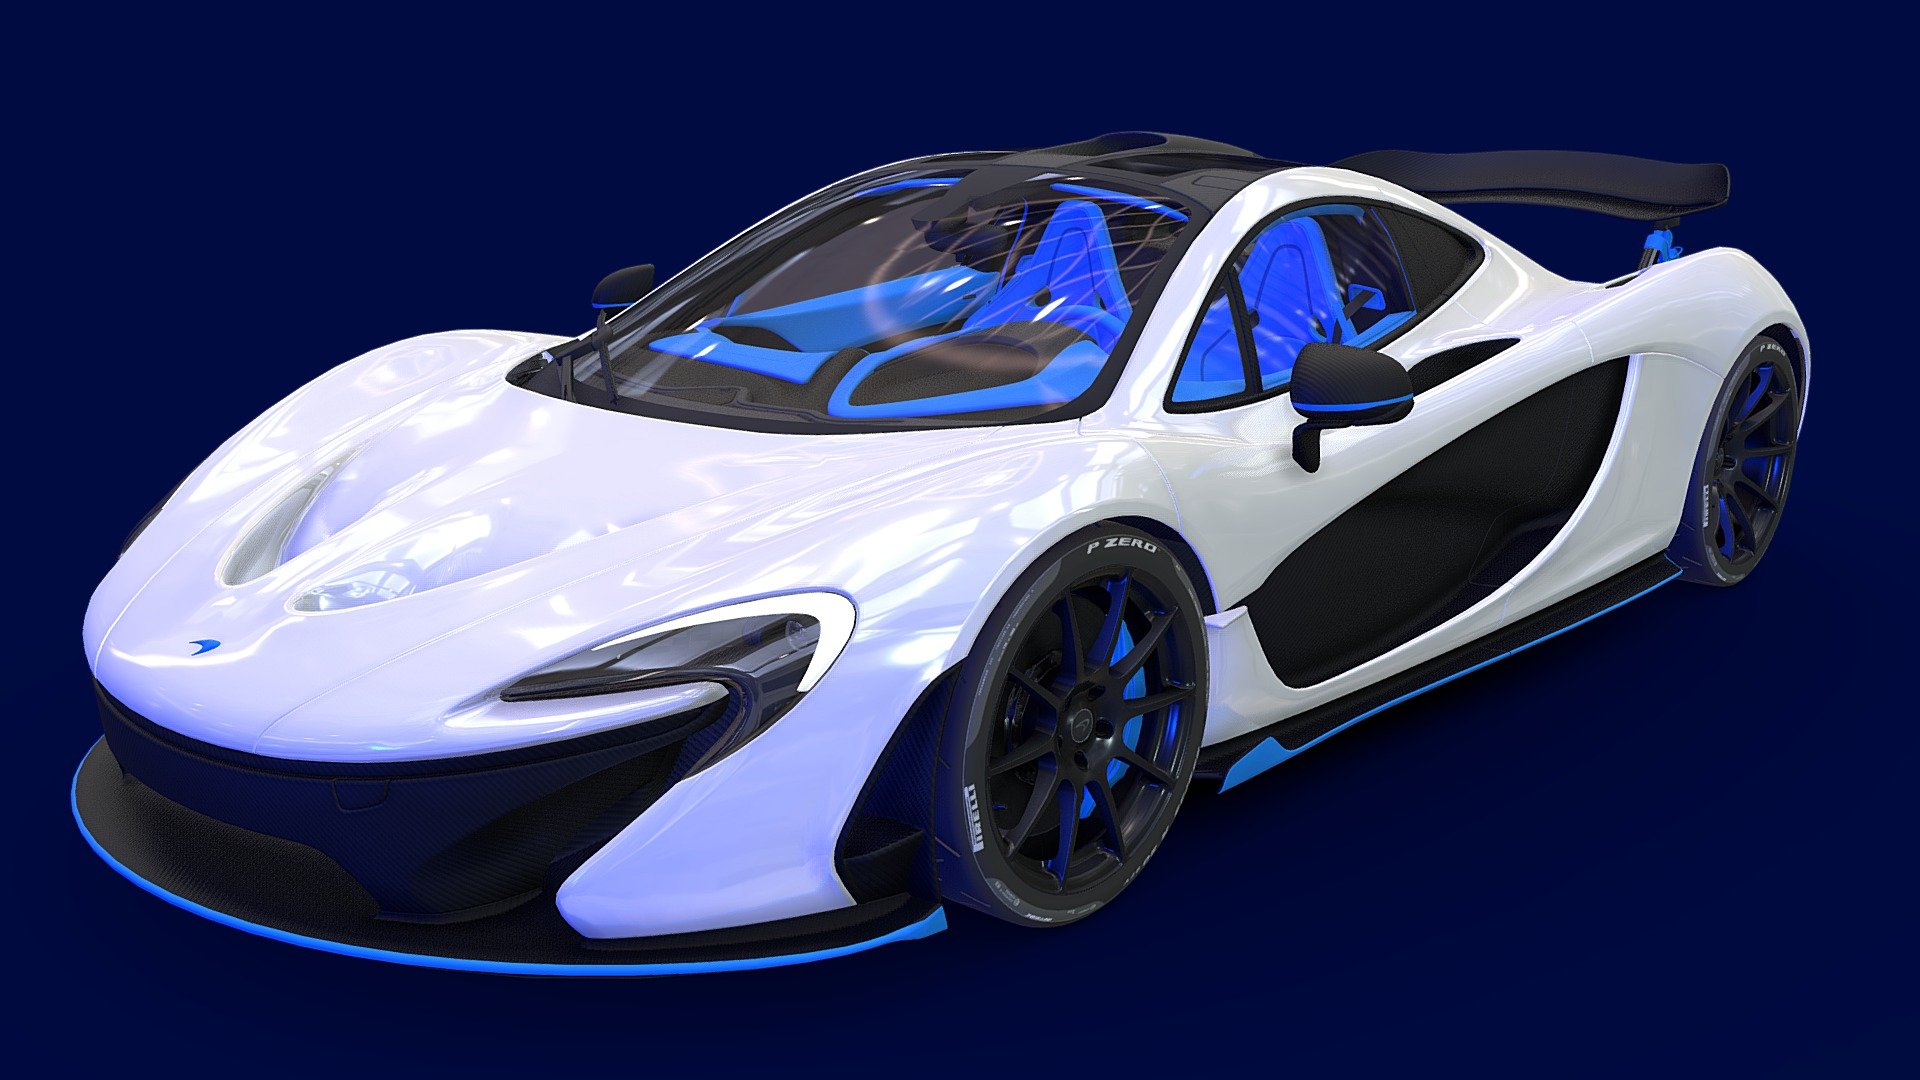 Model ready to be rigged, just download the rig-a-car addon for blender.

The McLaren P1 is a supercar produced by British marque McLaren Automotive. It is a plug-in hybrid with a mid-engine layout. It was first shown at the 2012 Paris Motor Show, with sales of the P1 beginning in the United Kingdom in October 2013 and all of the limited run of 375 units sold by November 2013. Production ended in early December 2015.

The P1 features a 3.8 L; 231.8 cu in (3,799 cc) twin-turbocharged V8 engine. The twin turbos boost the petrol engine at 1.4 bar (20.3 psi) to deliver 542 kW (737 PS; 727 hp) at 7,500 rpm and 531 lb⋅ft (720 N⋅m) of torque at 4,000 rpm, combined with an in-house-developed electric motor producing 132 kW (179 PS; 177 hp) and 192 lb⋅ft (260 N⋅m) of torque. The electric motor and the petrol engine in the P1, produce a combined power output of 674 kW (916 PS; 903 hp) and 900 N⋅m (664 lb⋅ft) of torque.

And not to mention my favourite car of all time 3d model